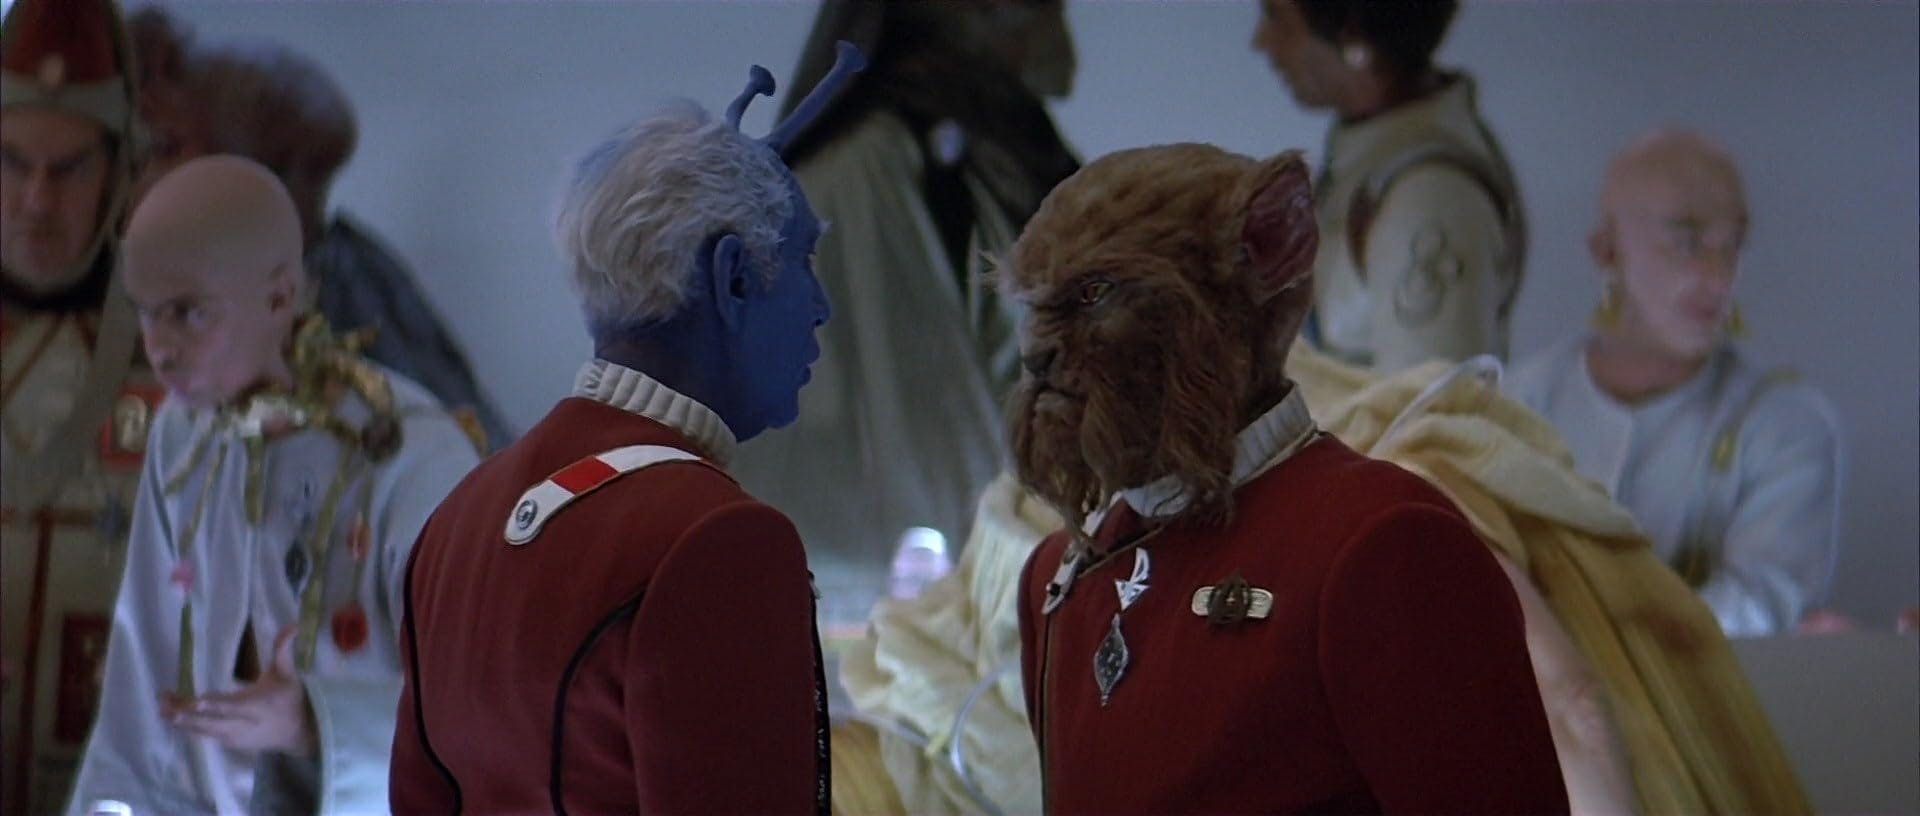 At the Federation Council, an Andorian and Caitian private talk amongst themselves in Star Trek: The Voyage Home